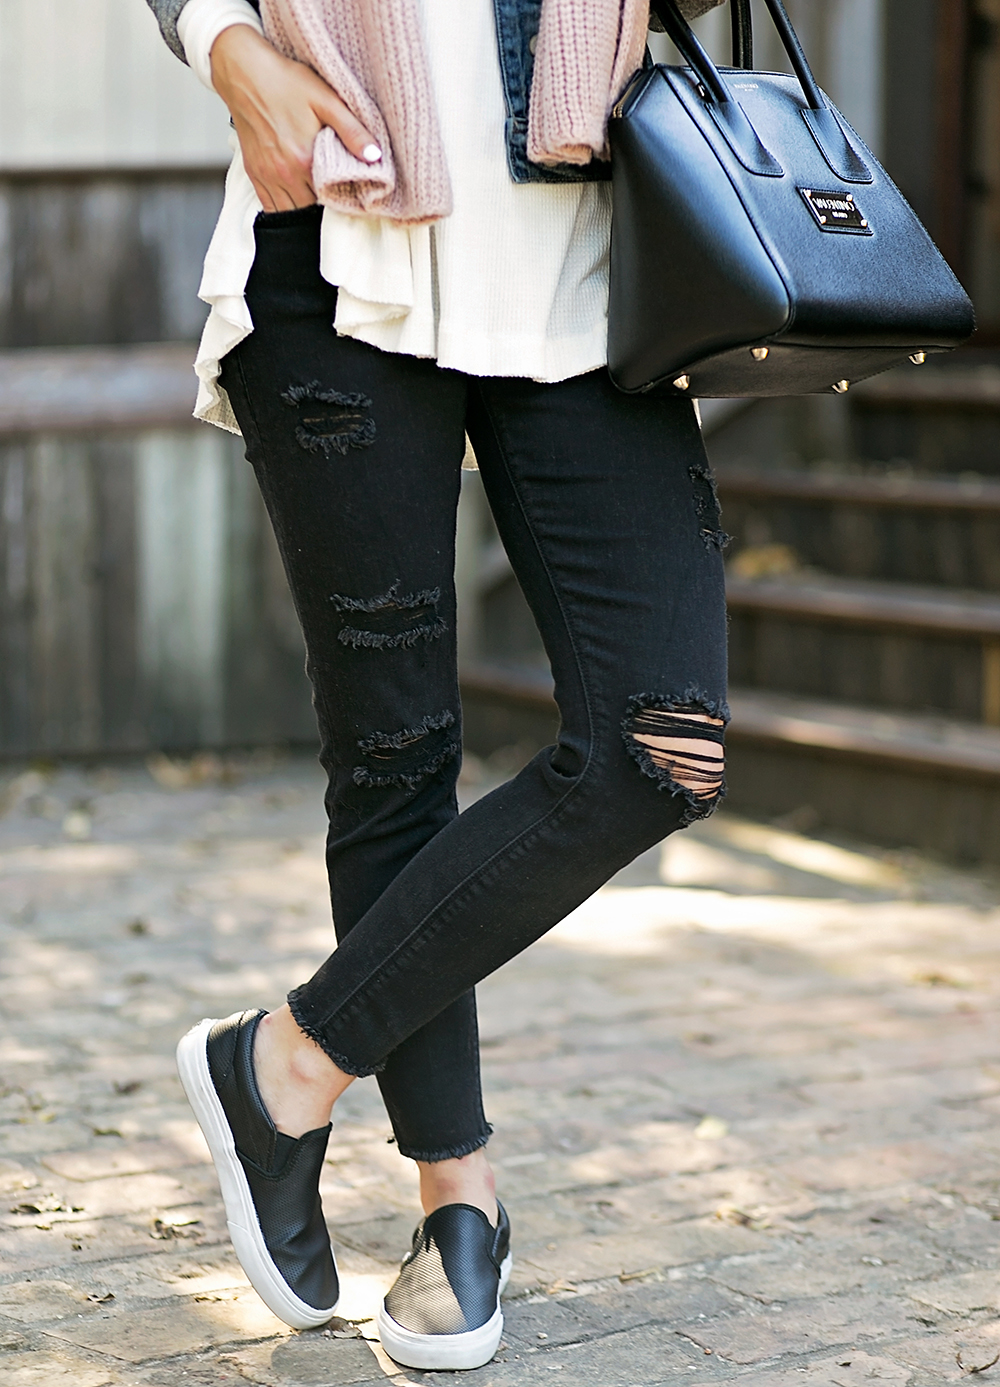 livvyland-blog-olivia-watson-austin-texas-fashion-blogger-toms-coffee-roasters-silver-jeans-tuesday-skinny-jeans-vans-slip-on-black-sneakers-7